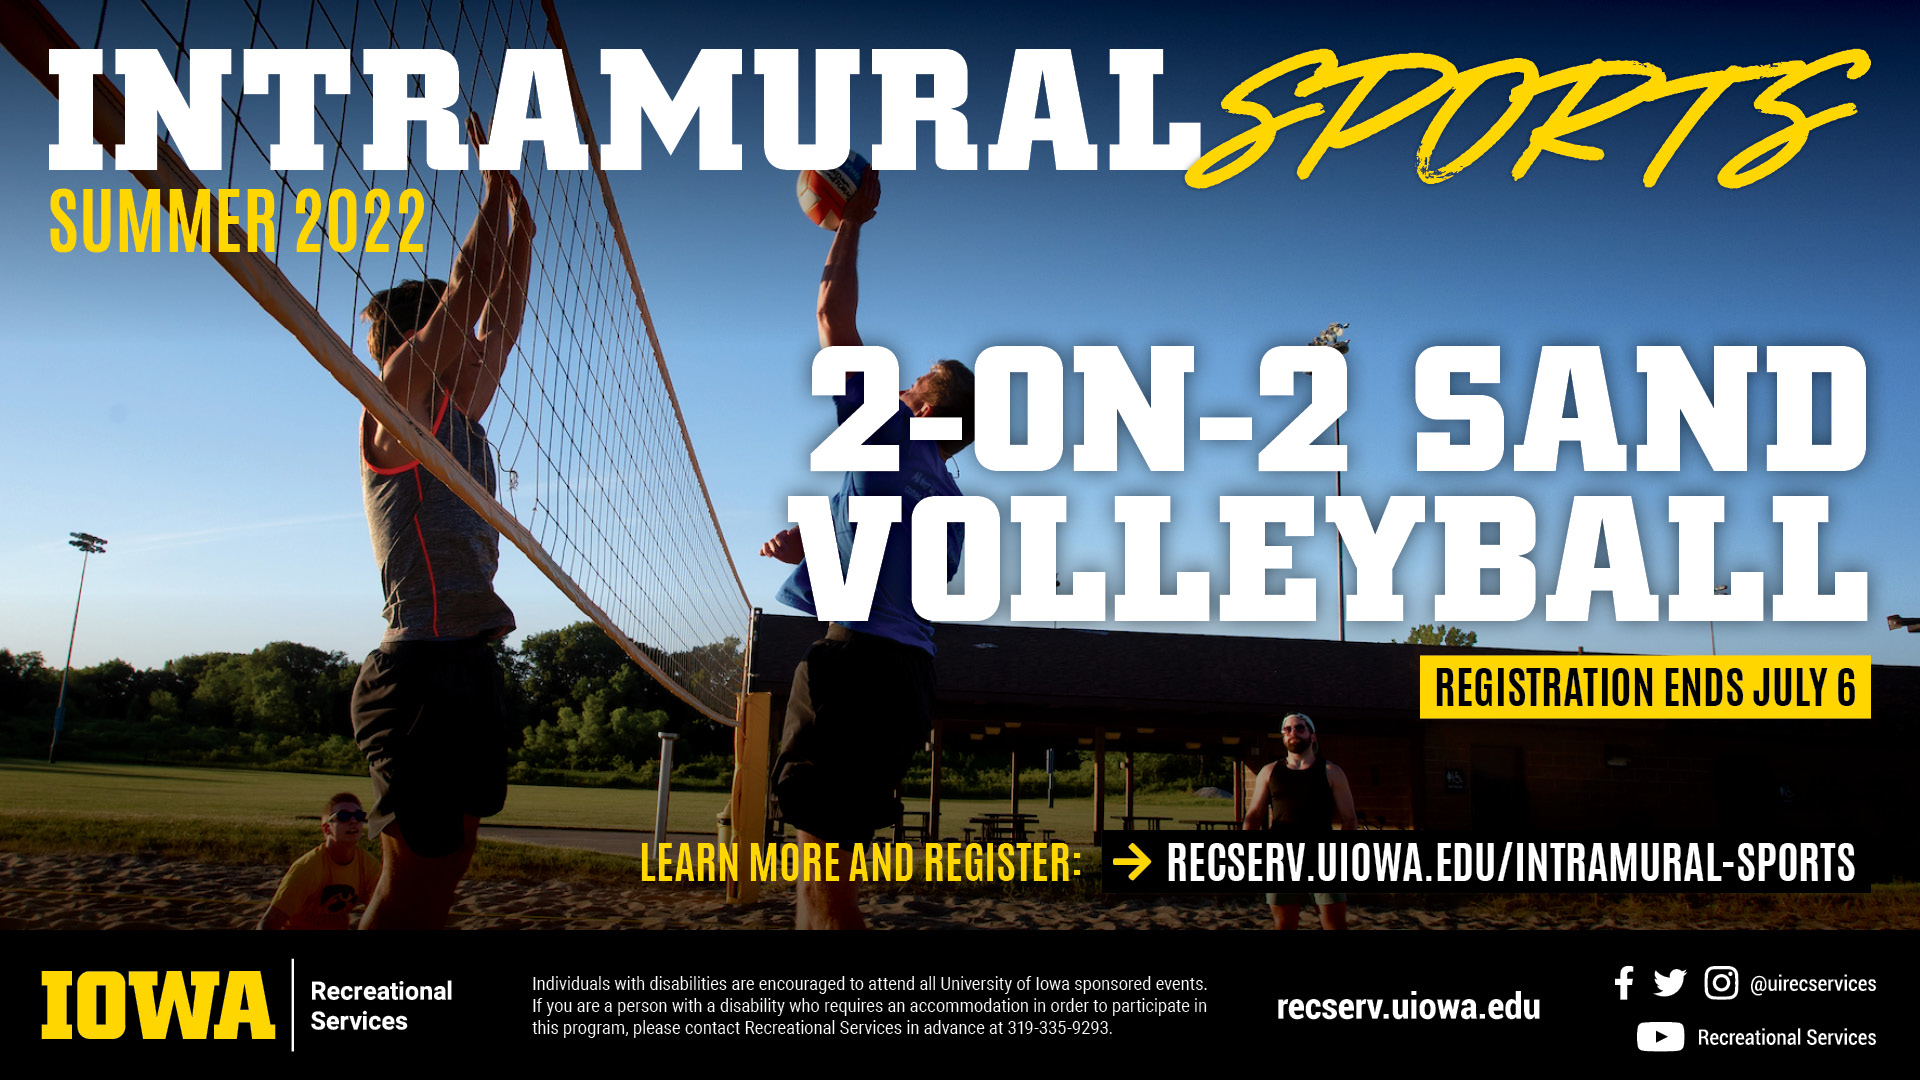 Summer 2022 Intramural Sports 2 on 2 Sand Volleyball. Registration ends July 6. Learn more and register: recserv.uiowa.edu/intramural-sports